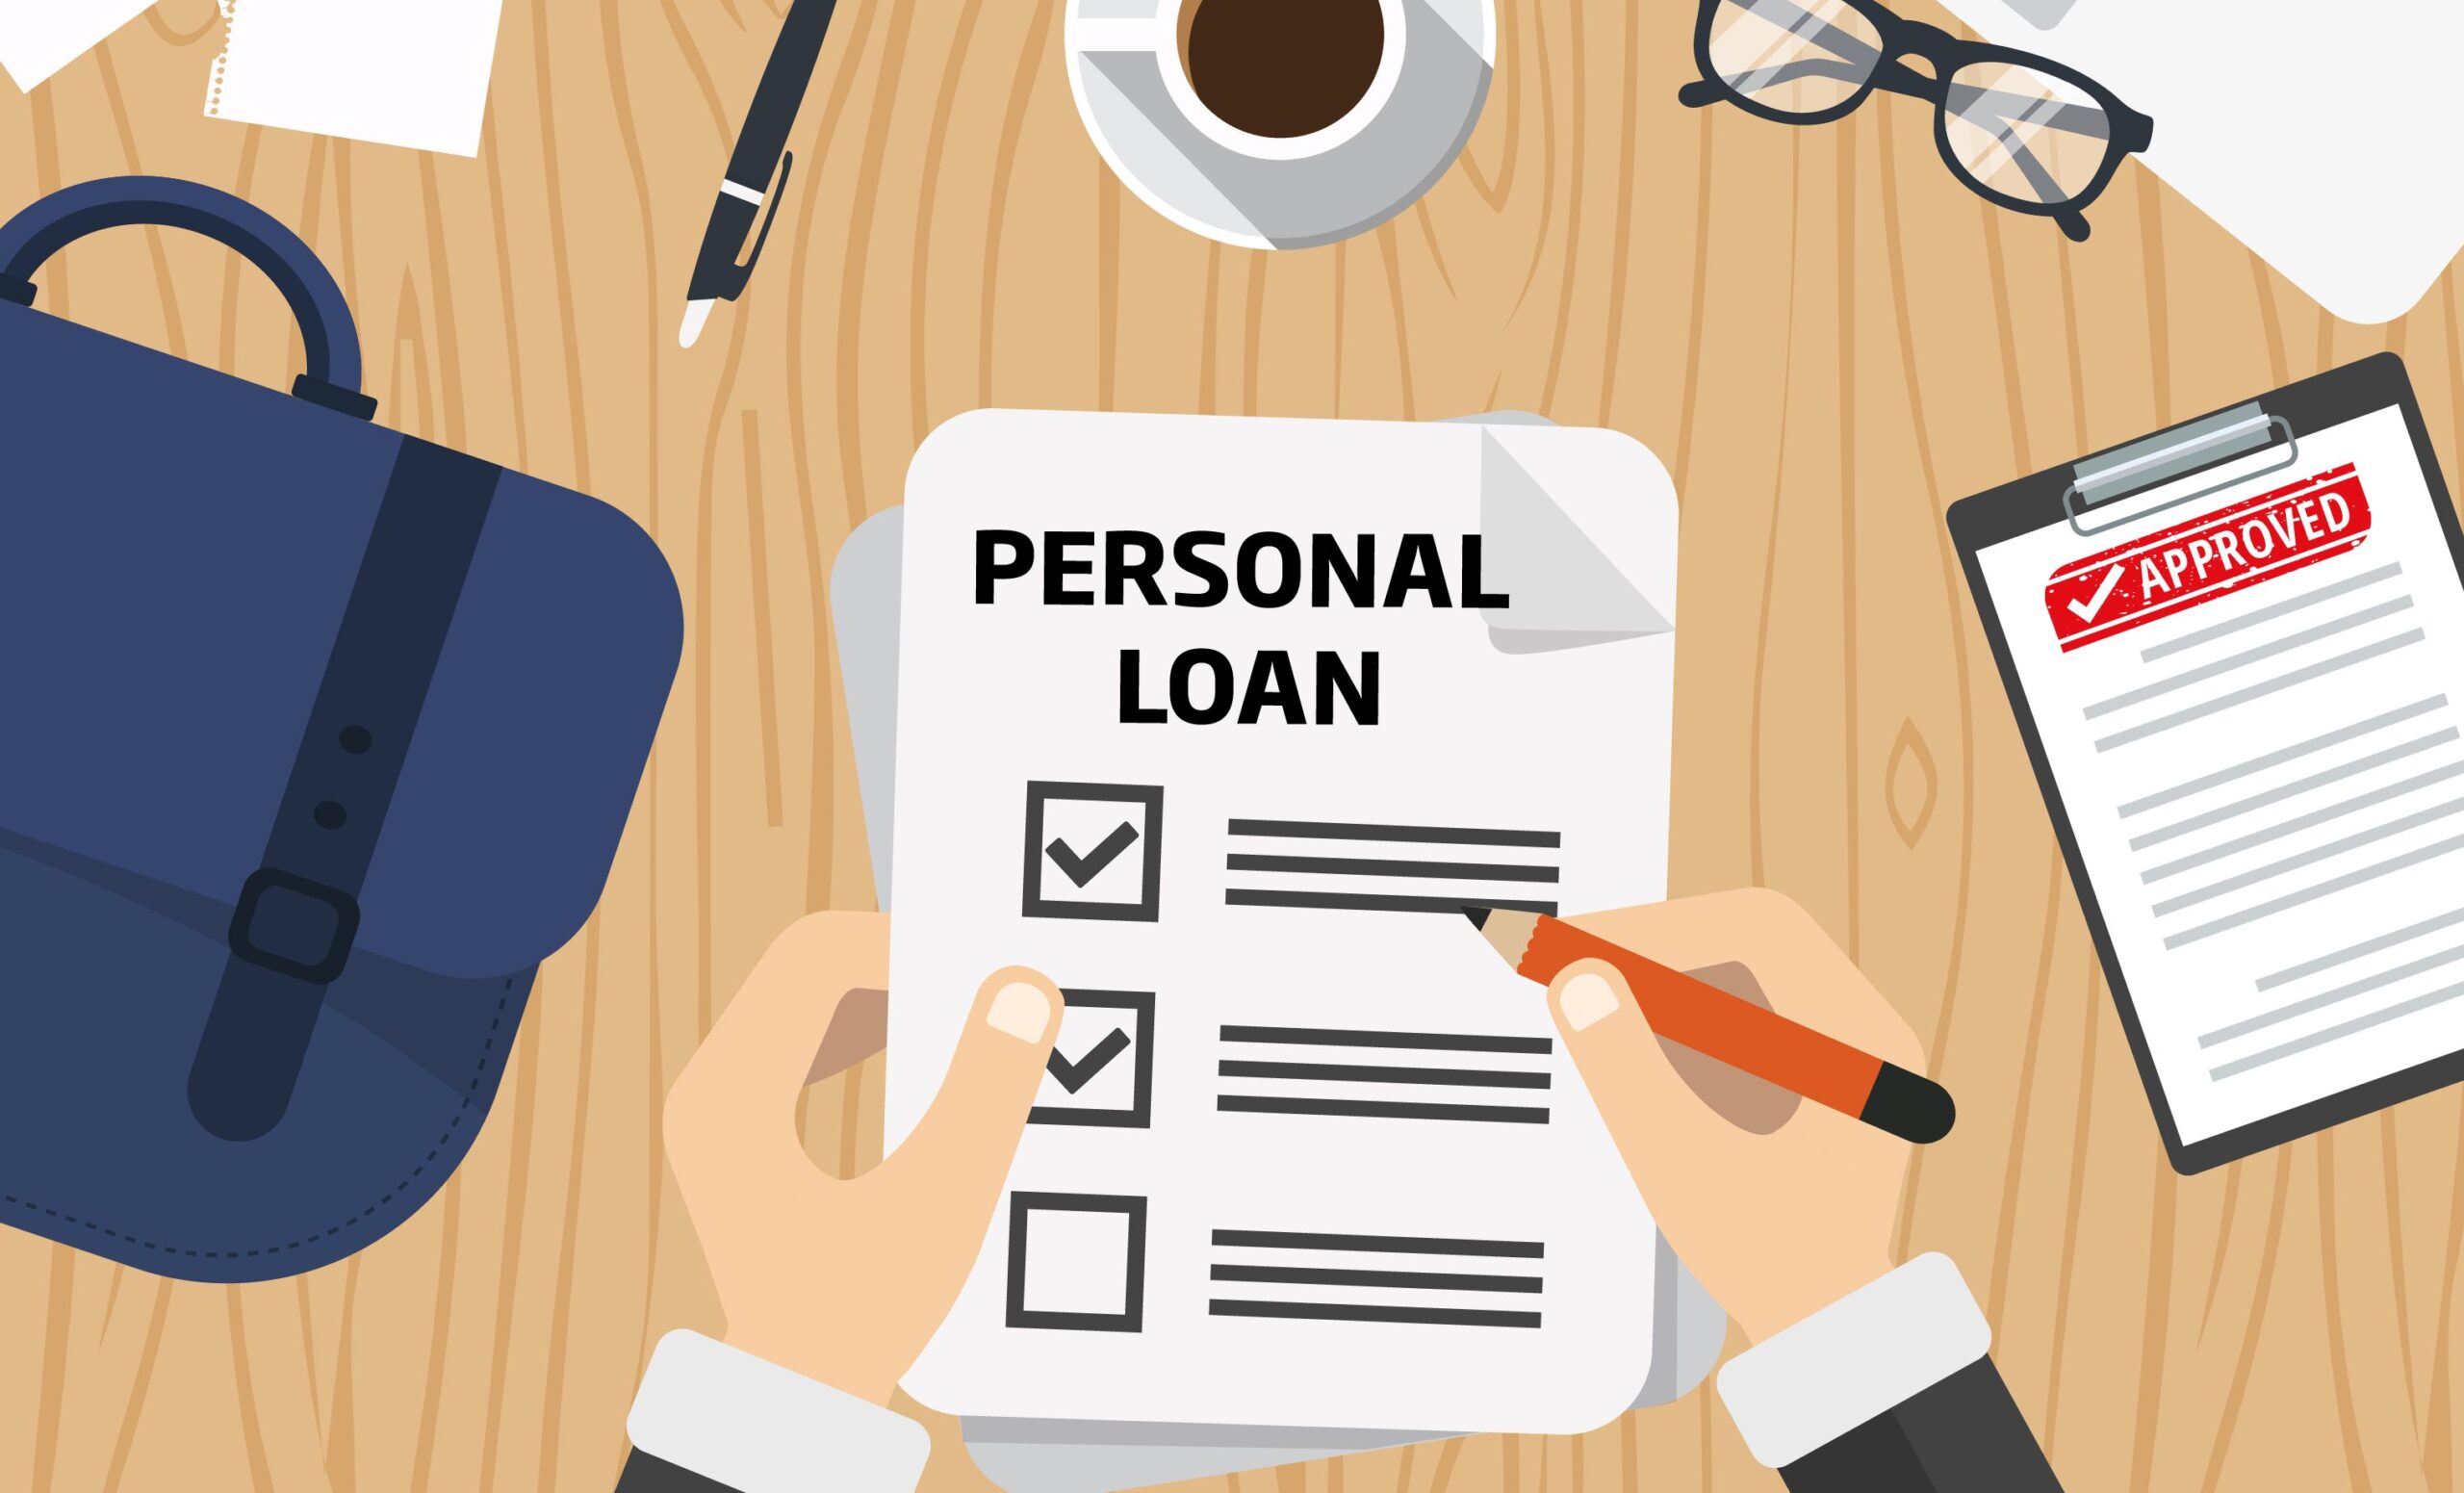 Things For Which You Can and Cannot Use Personal Loans